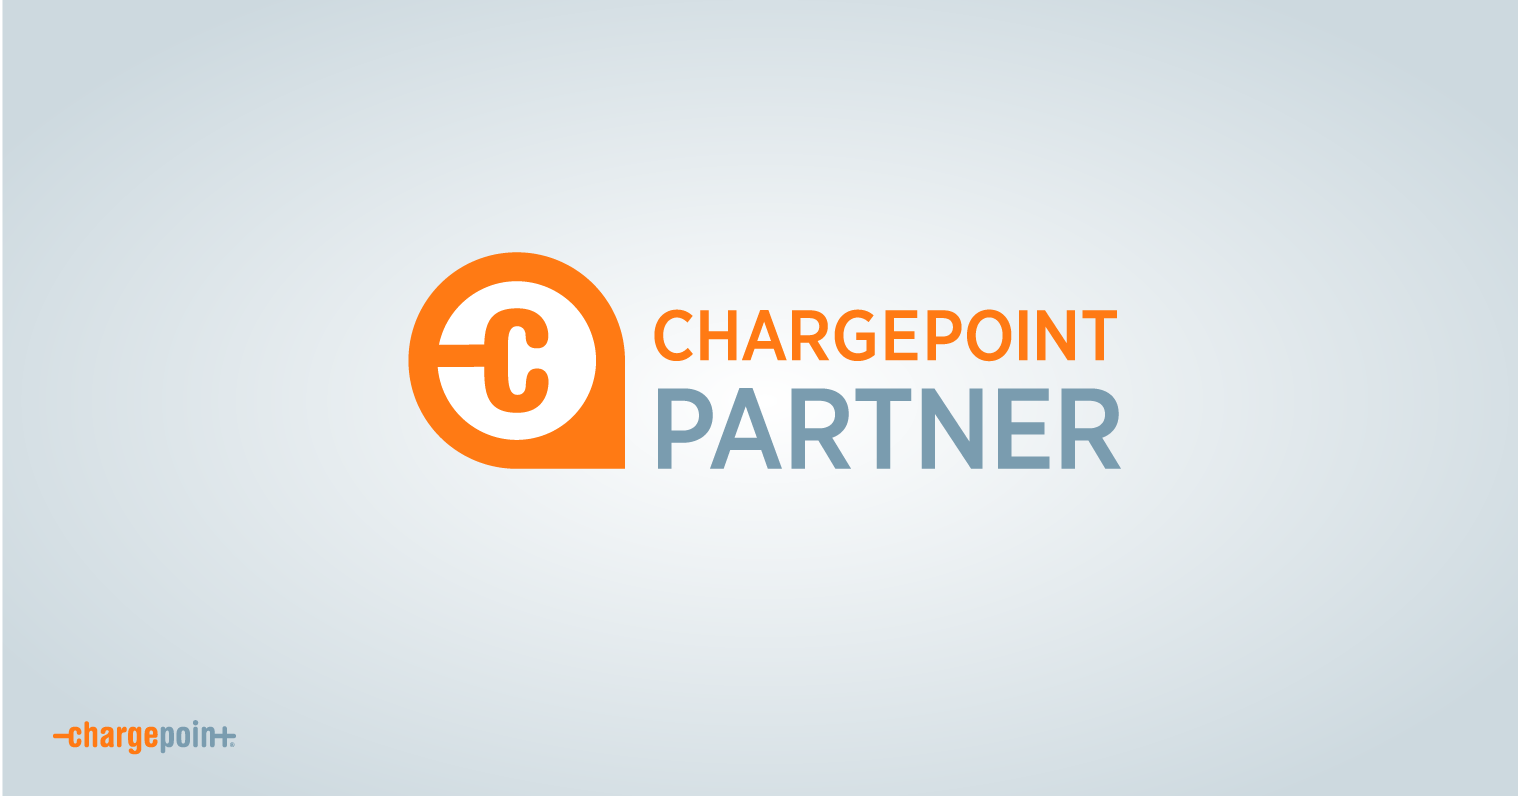 ChargePoint Partner logo